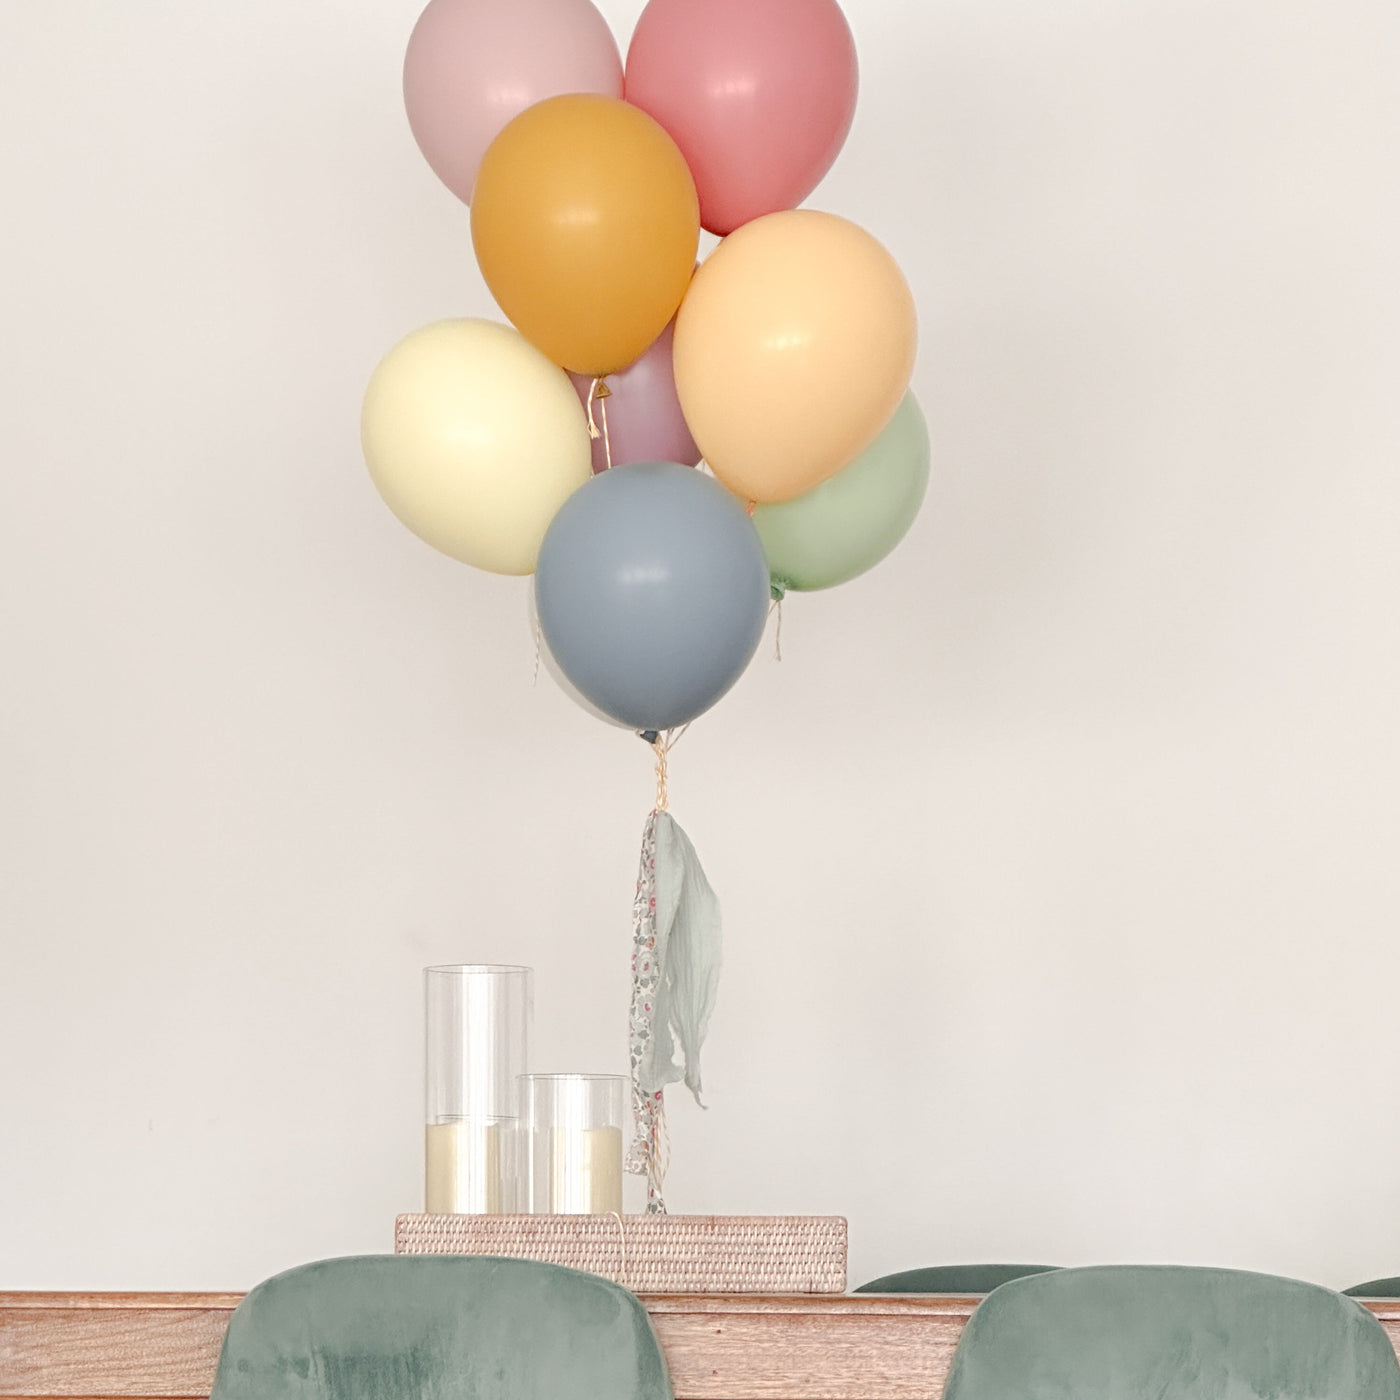 Bouquet of powdered latex balloons inflated with helium